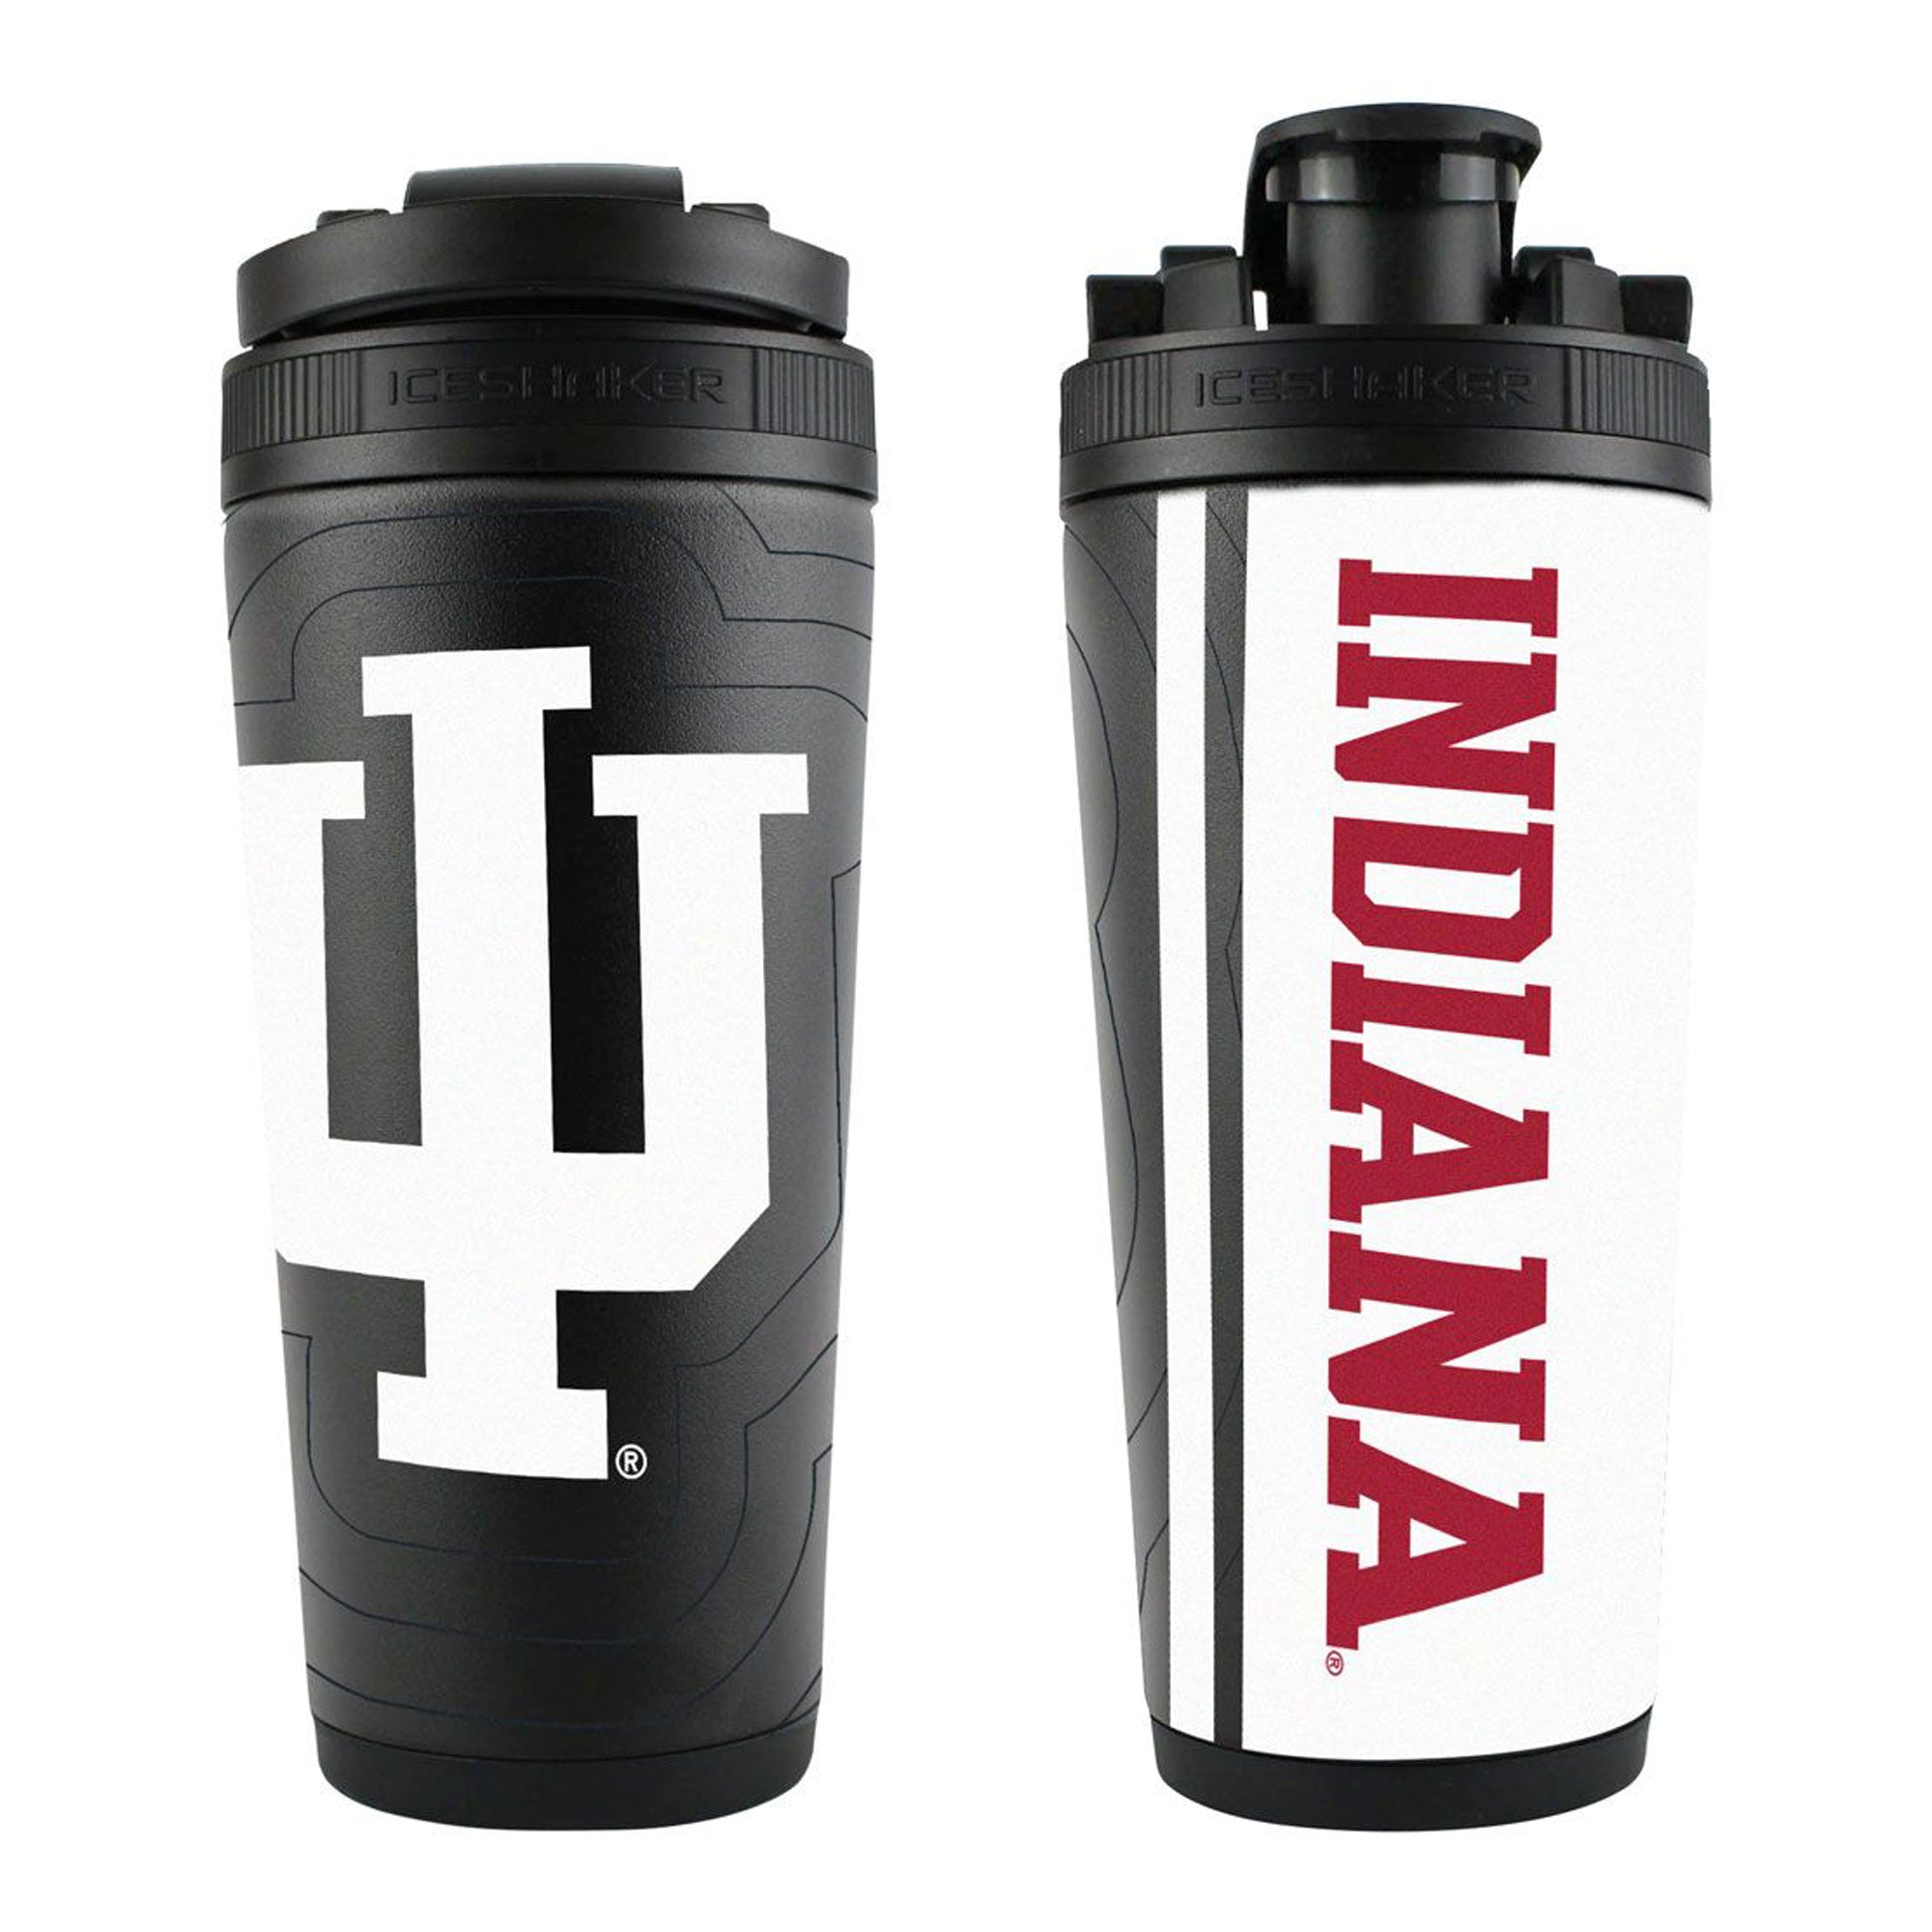 Officially Licensed Indiana University Hoosiers Sonar 4D Ice Shaker